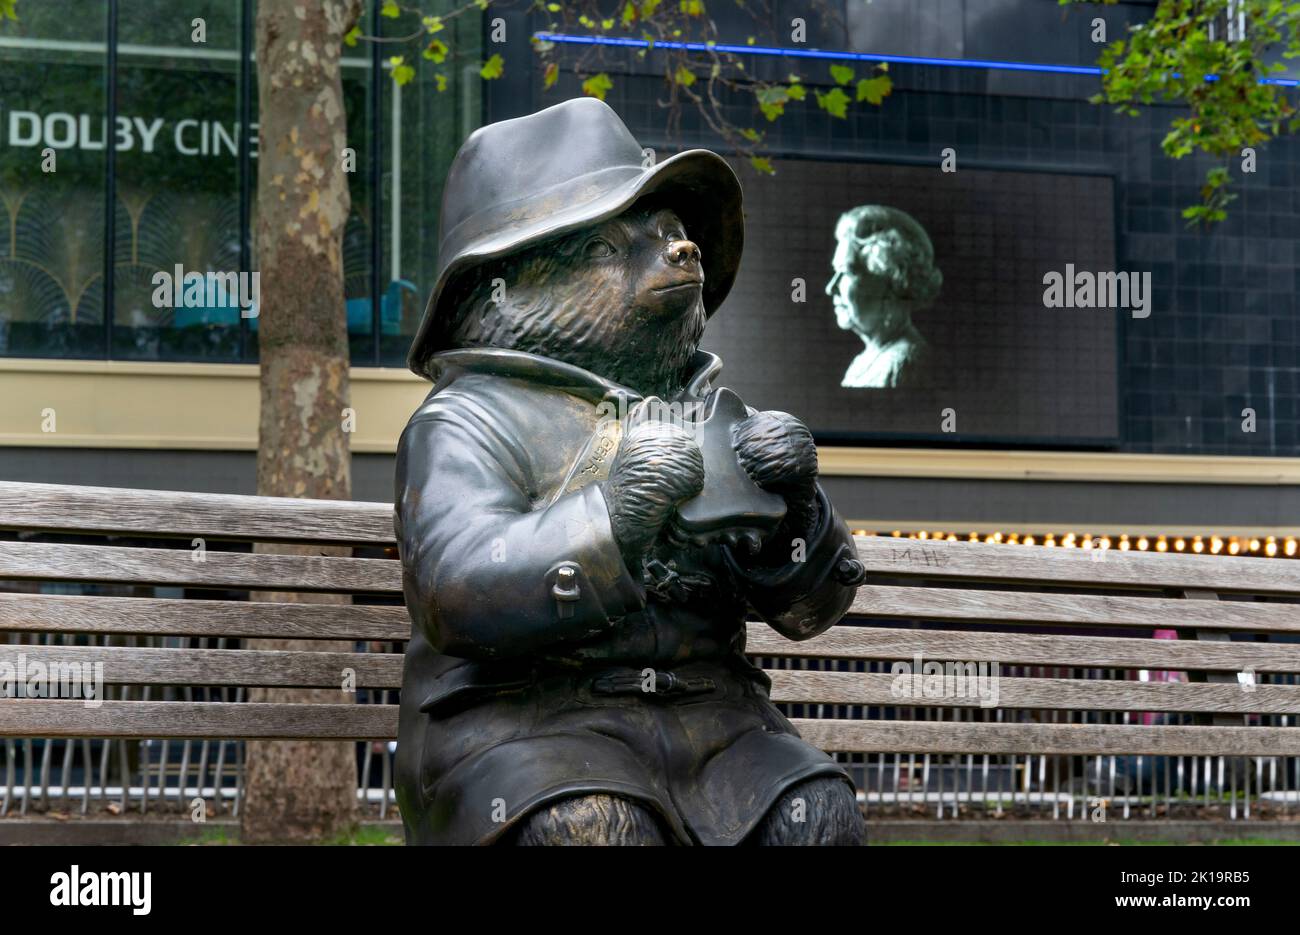 © Jeff Moore  A tribute to the late QUEEN ELIZABETH II at the Odean cinema is seen behind the bronze Paddington Bear statue in London’s Leicester Squa Stock Photo